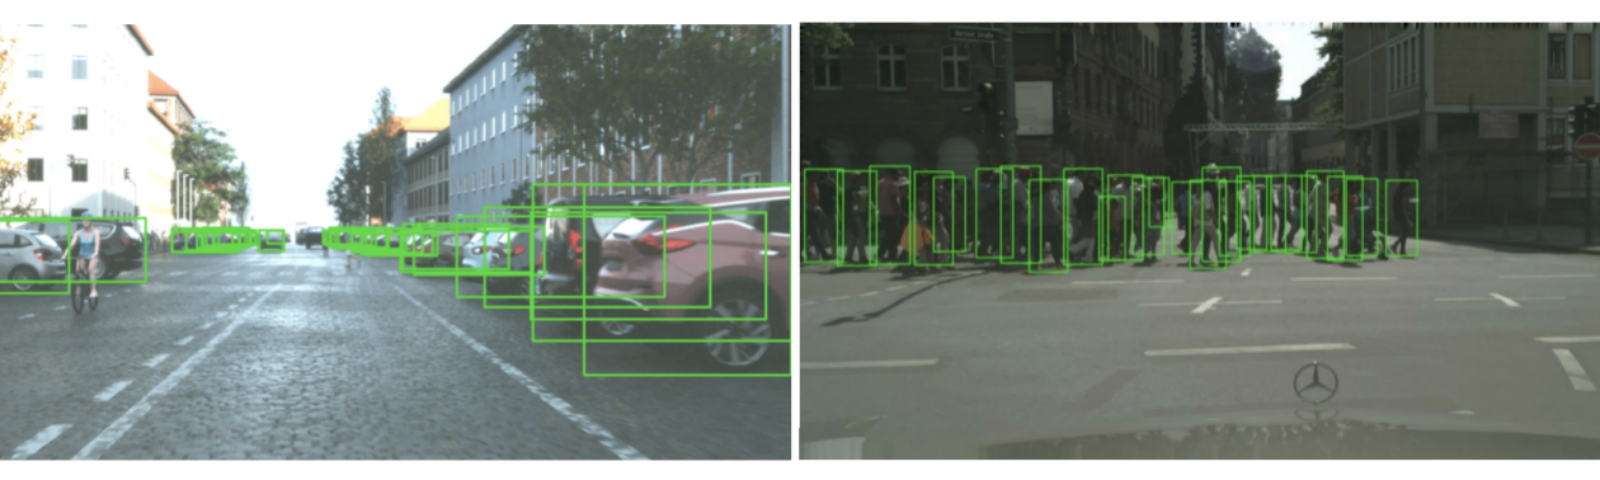 Object Detection in Crowded Scenes